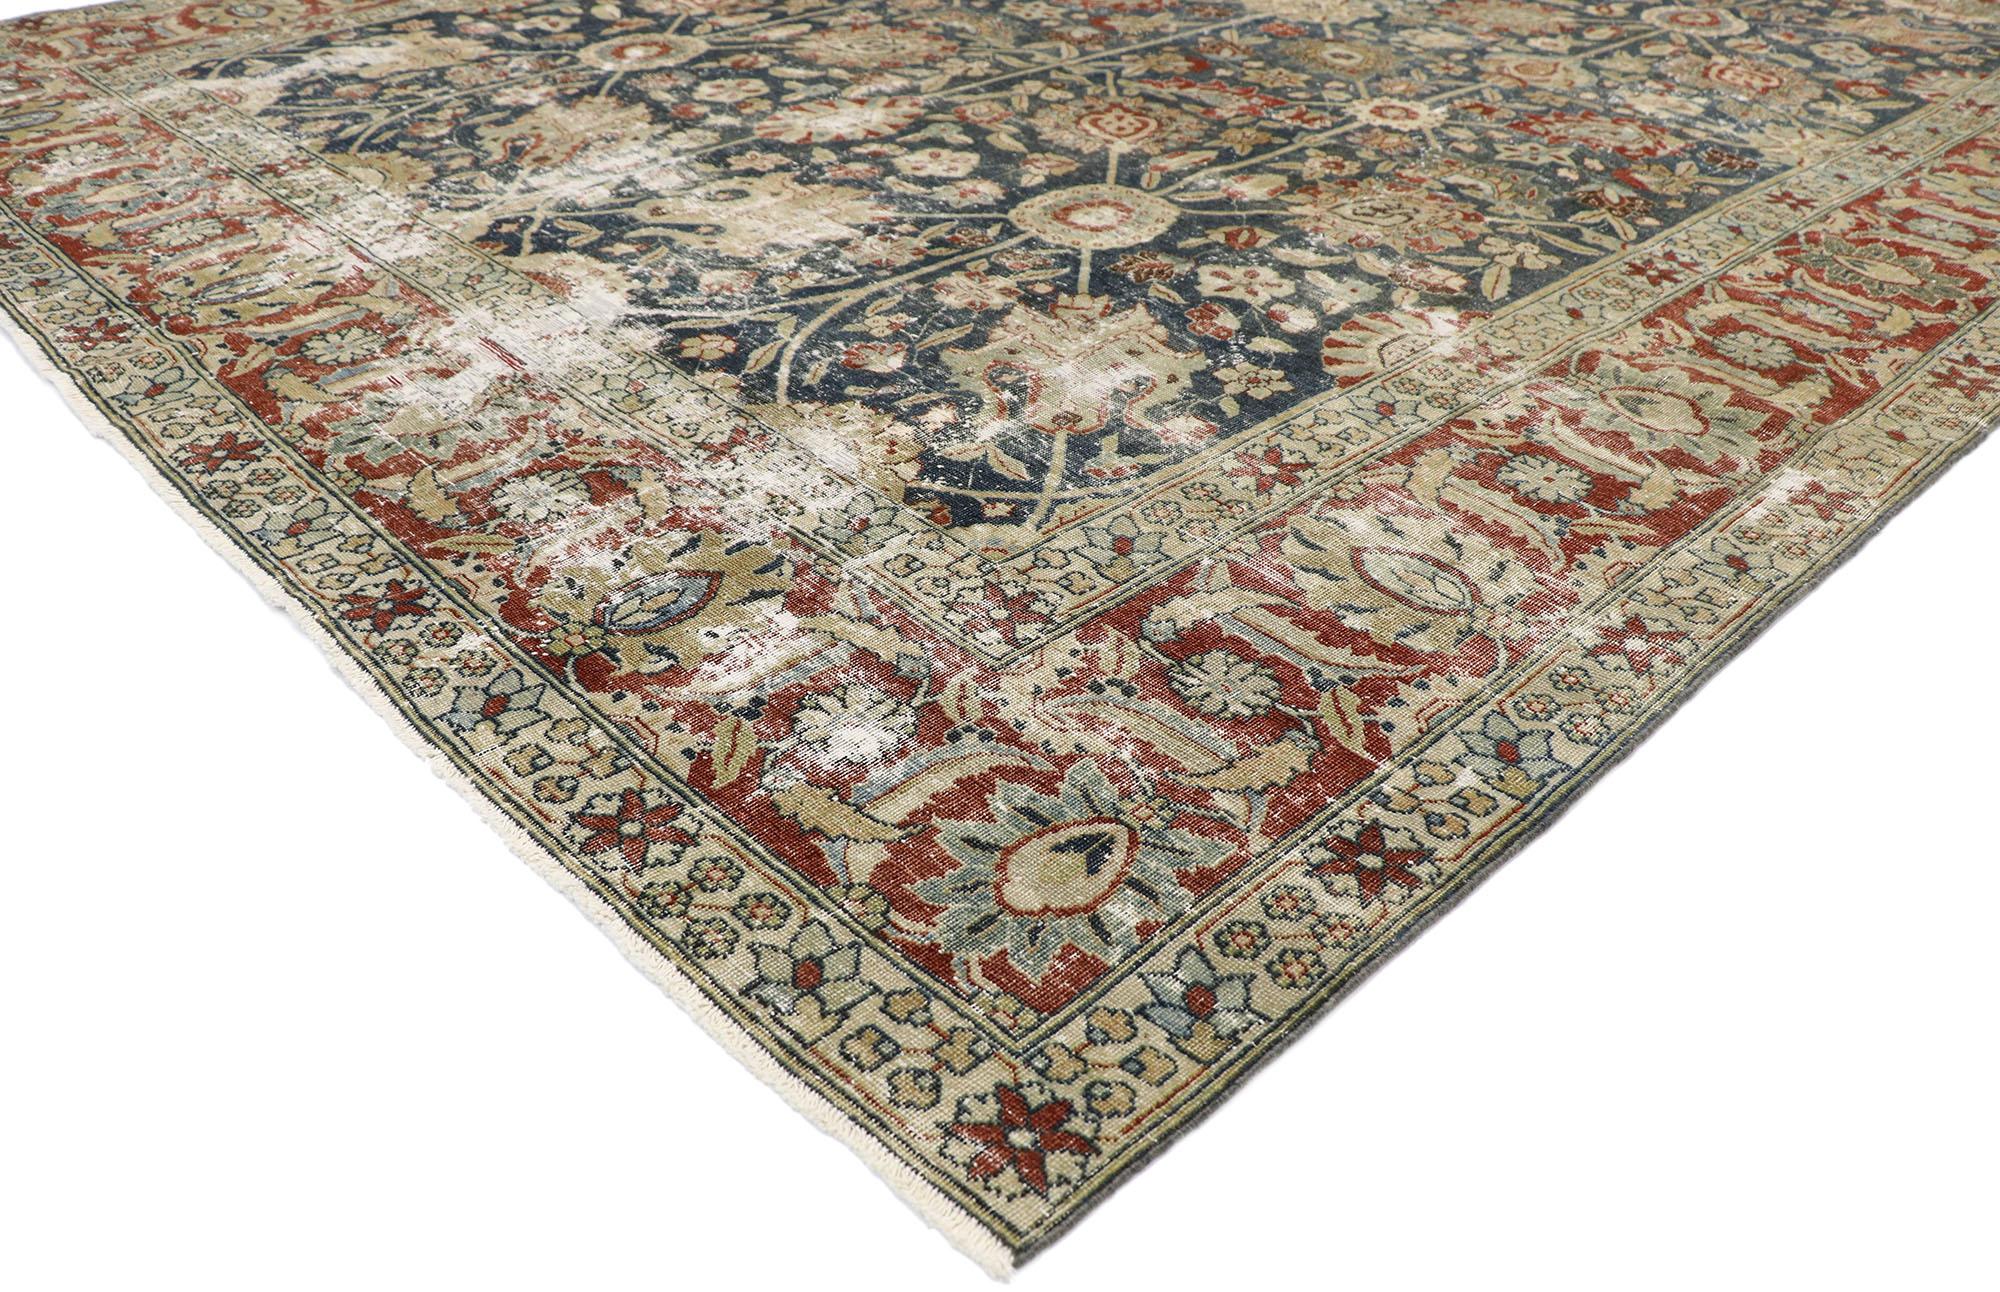 60842, distressed antique Persian Tabriz rug with rustic old world English style 08'10 x 11'03. Cleverly composed and distinctively well-balanced, this hand knotted wool distressed antique Persian Tabriz rug will take on a curated lived-in look that